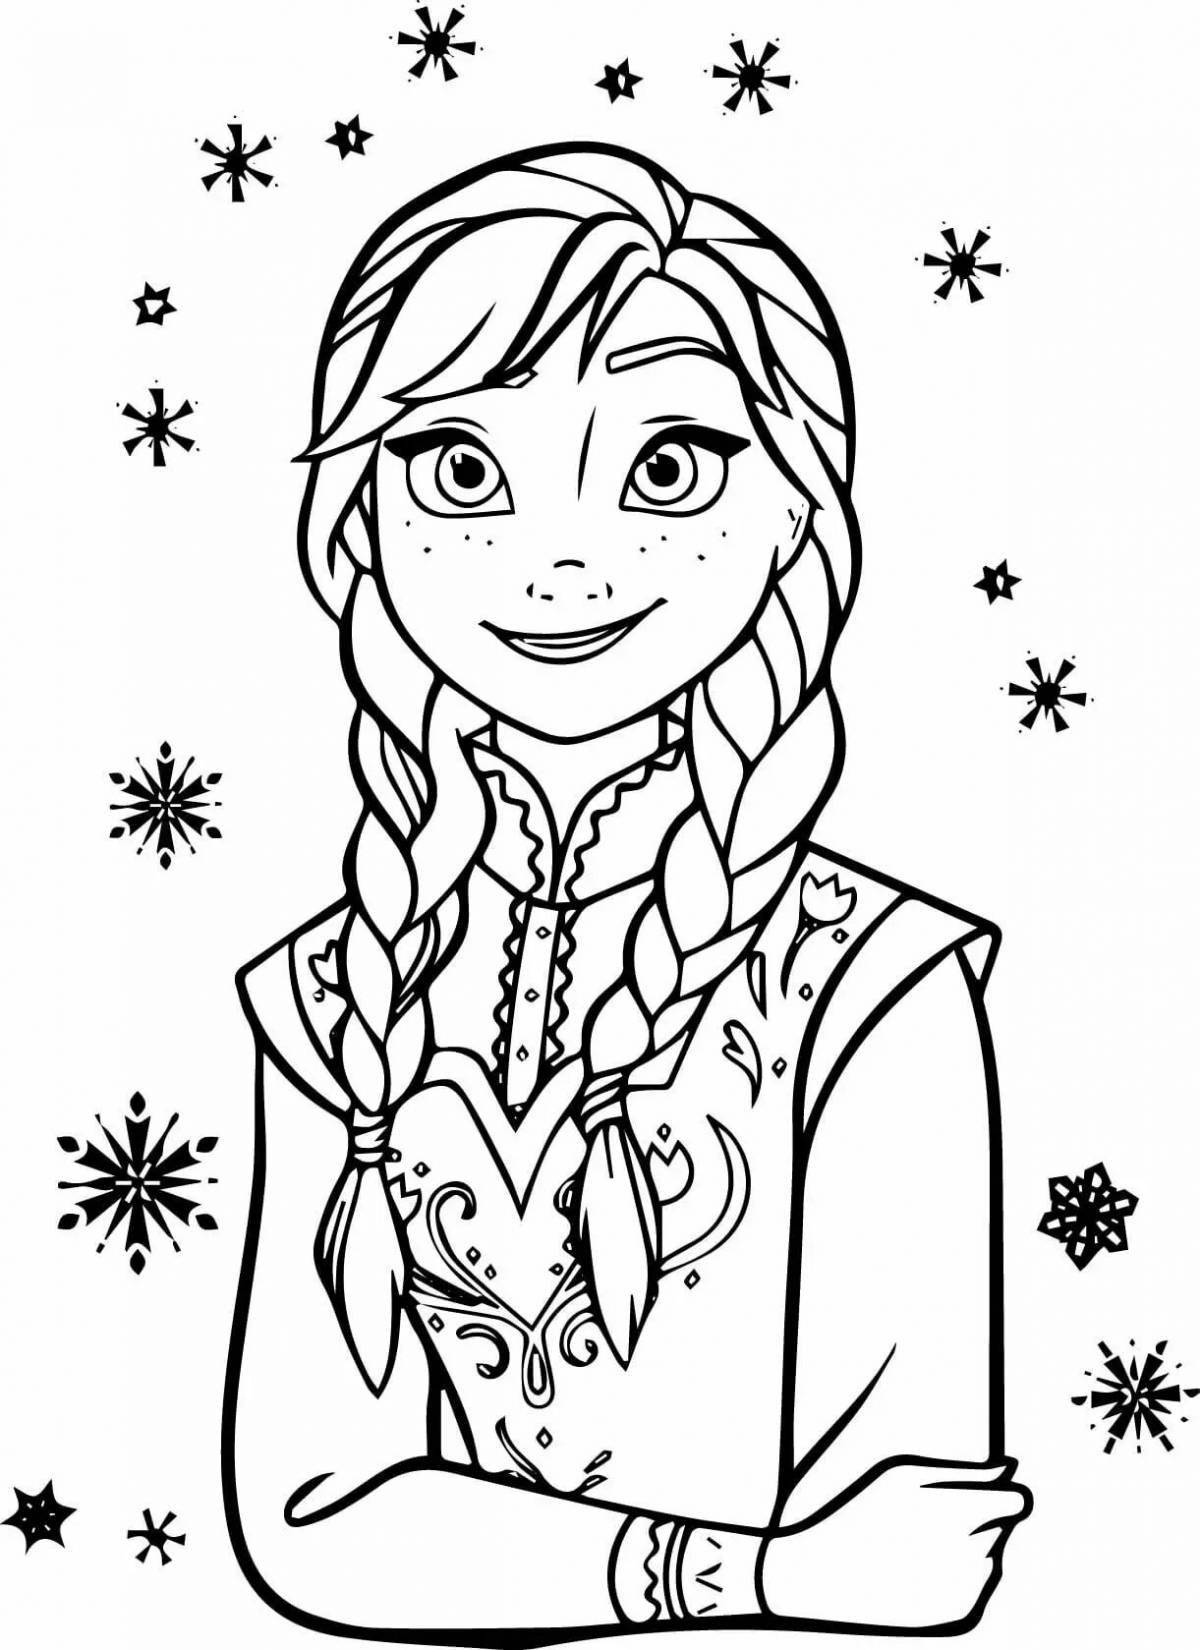 Coloring book sparkling cold heart for children 5-6 years old